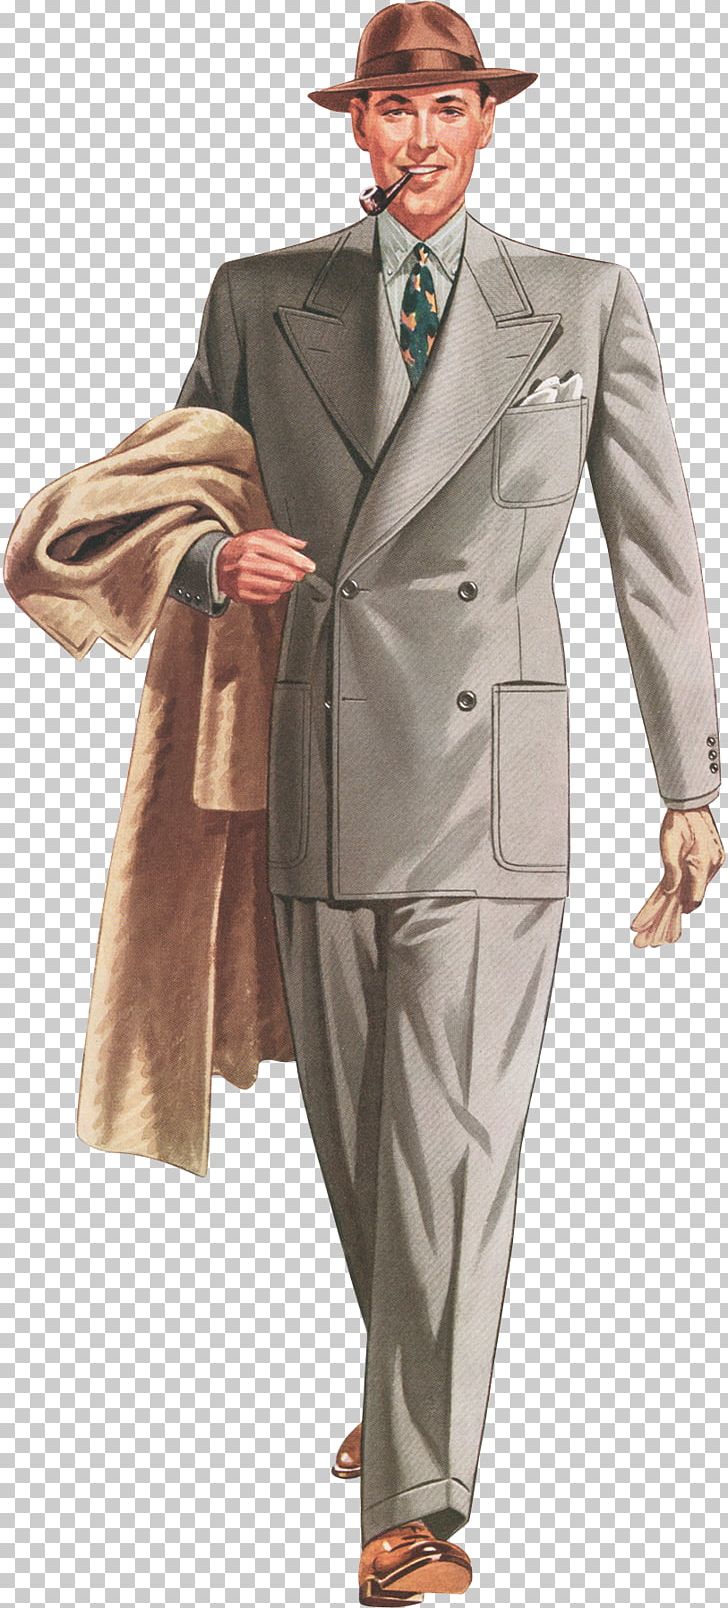 1930s 1940s Fashion Suit Vintage Clothing PNG, Clipart, 1930s, 1940s, Clothing, Costume, Costume Design Free PNG Download